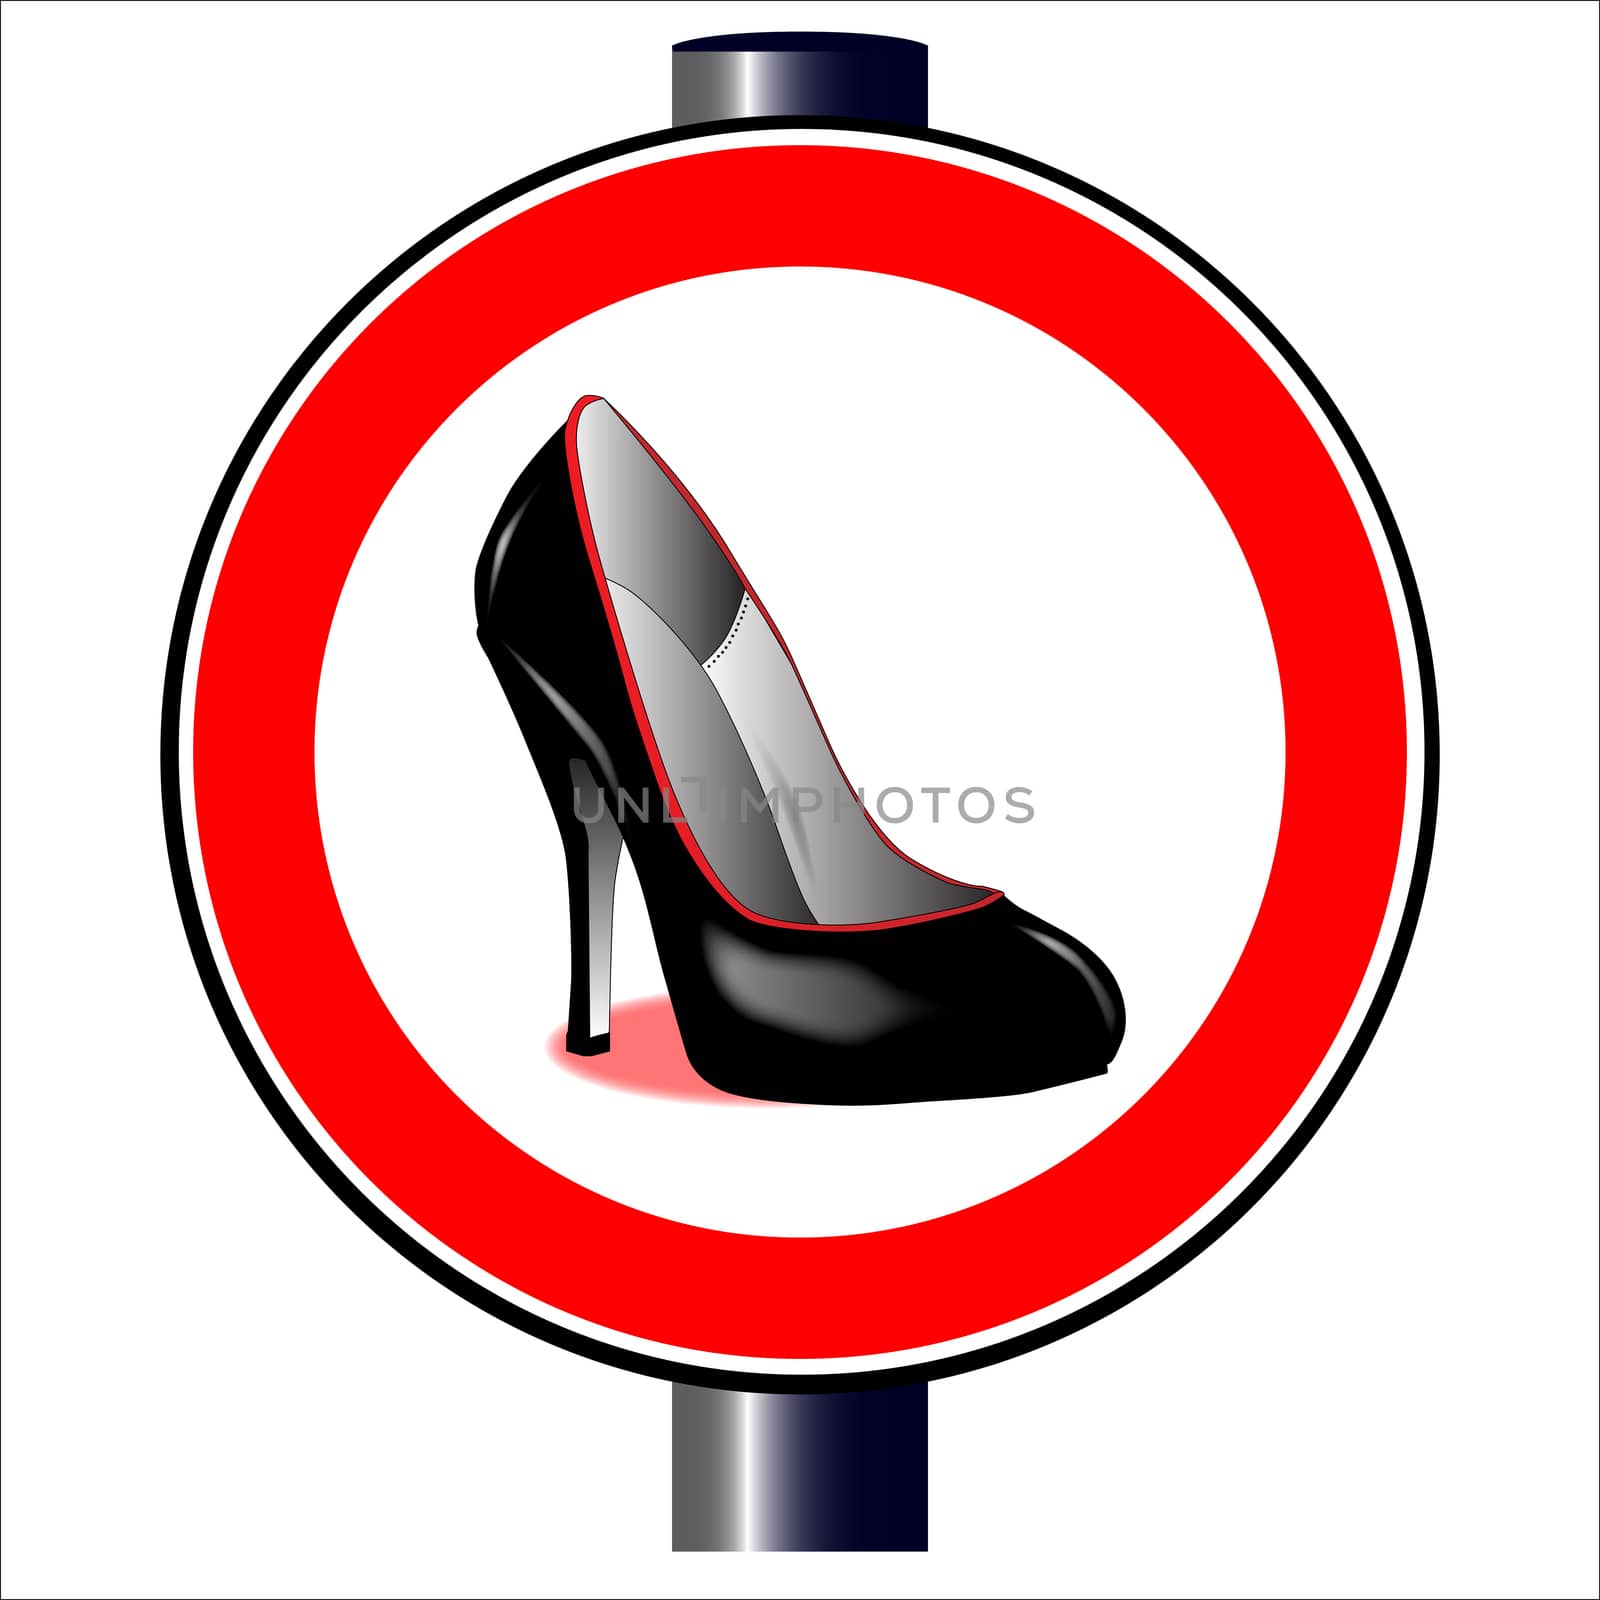 A large round red traffic displaying a stiletto heal shoe